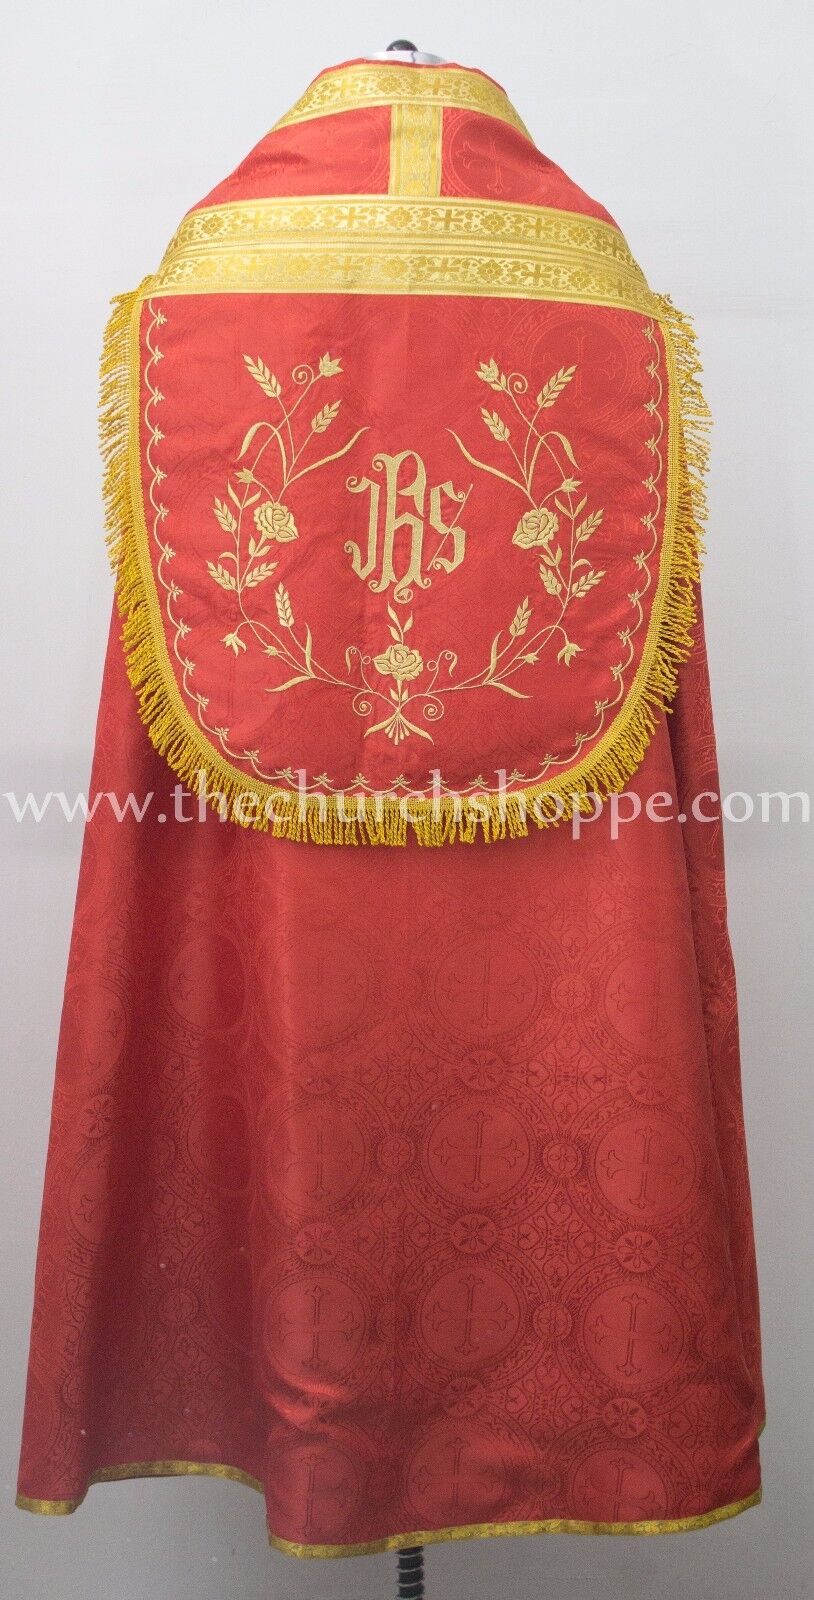 New Red Cope & Stole Set with IHS embroidery,capa pluvial,chape,far fronte